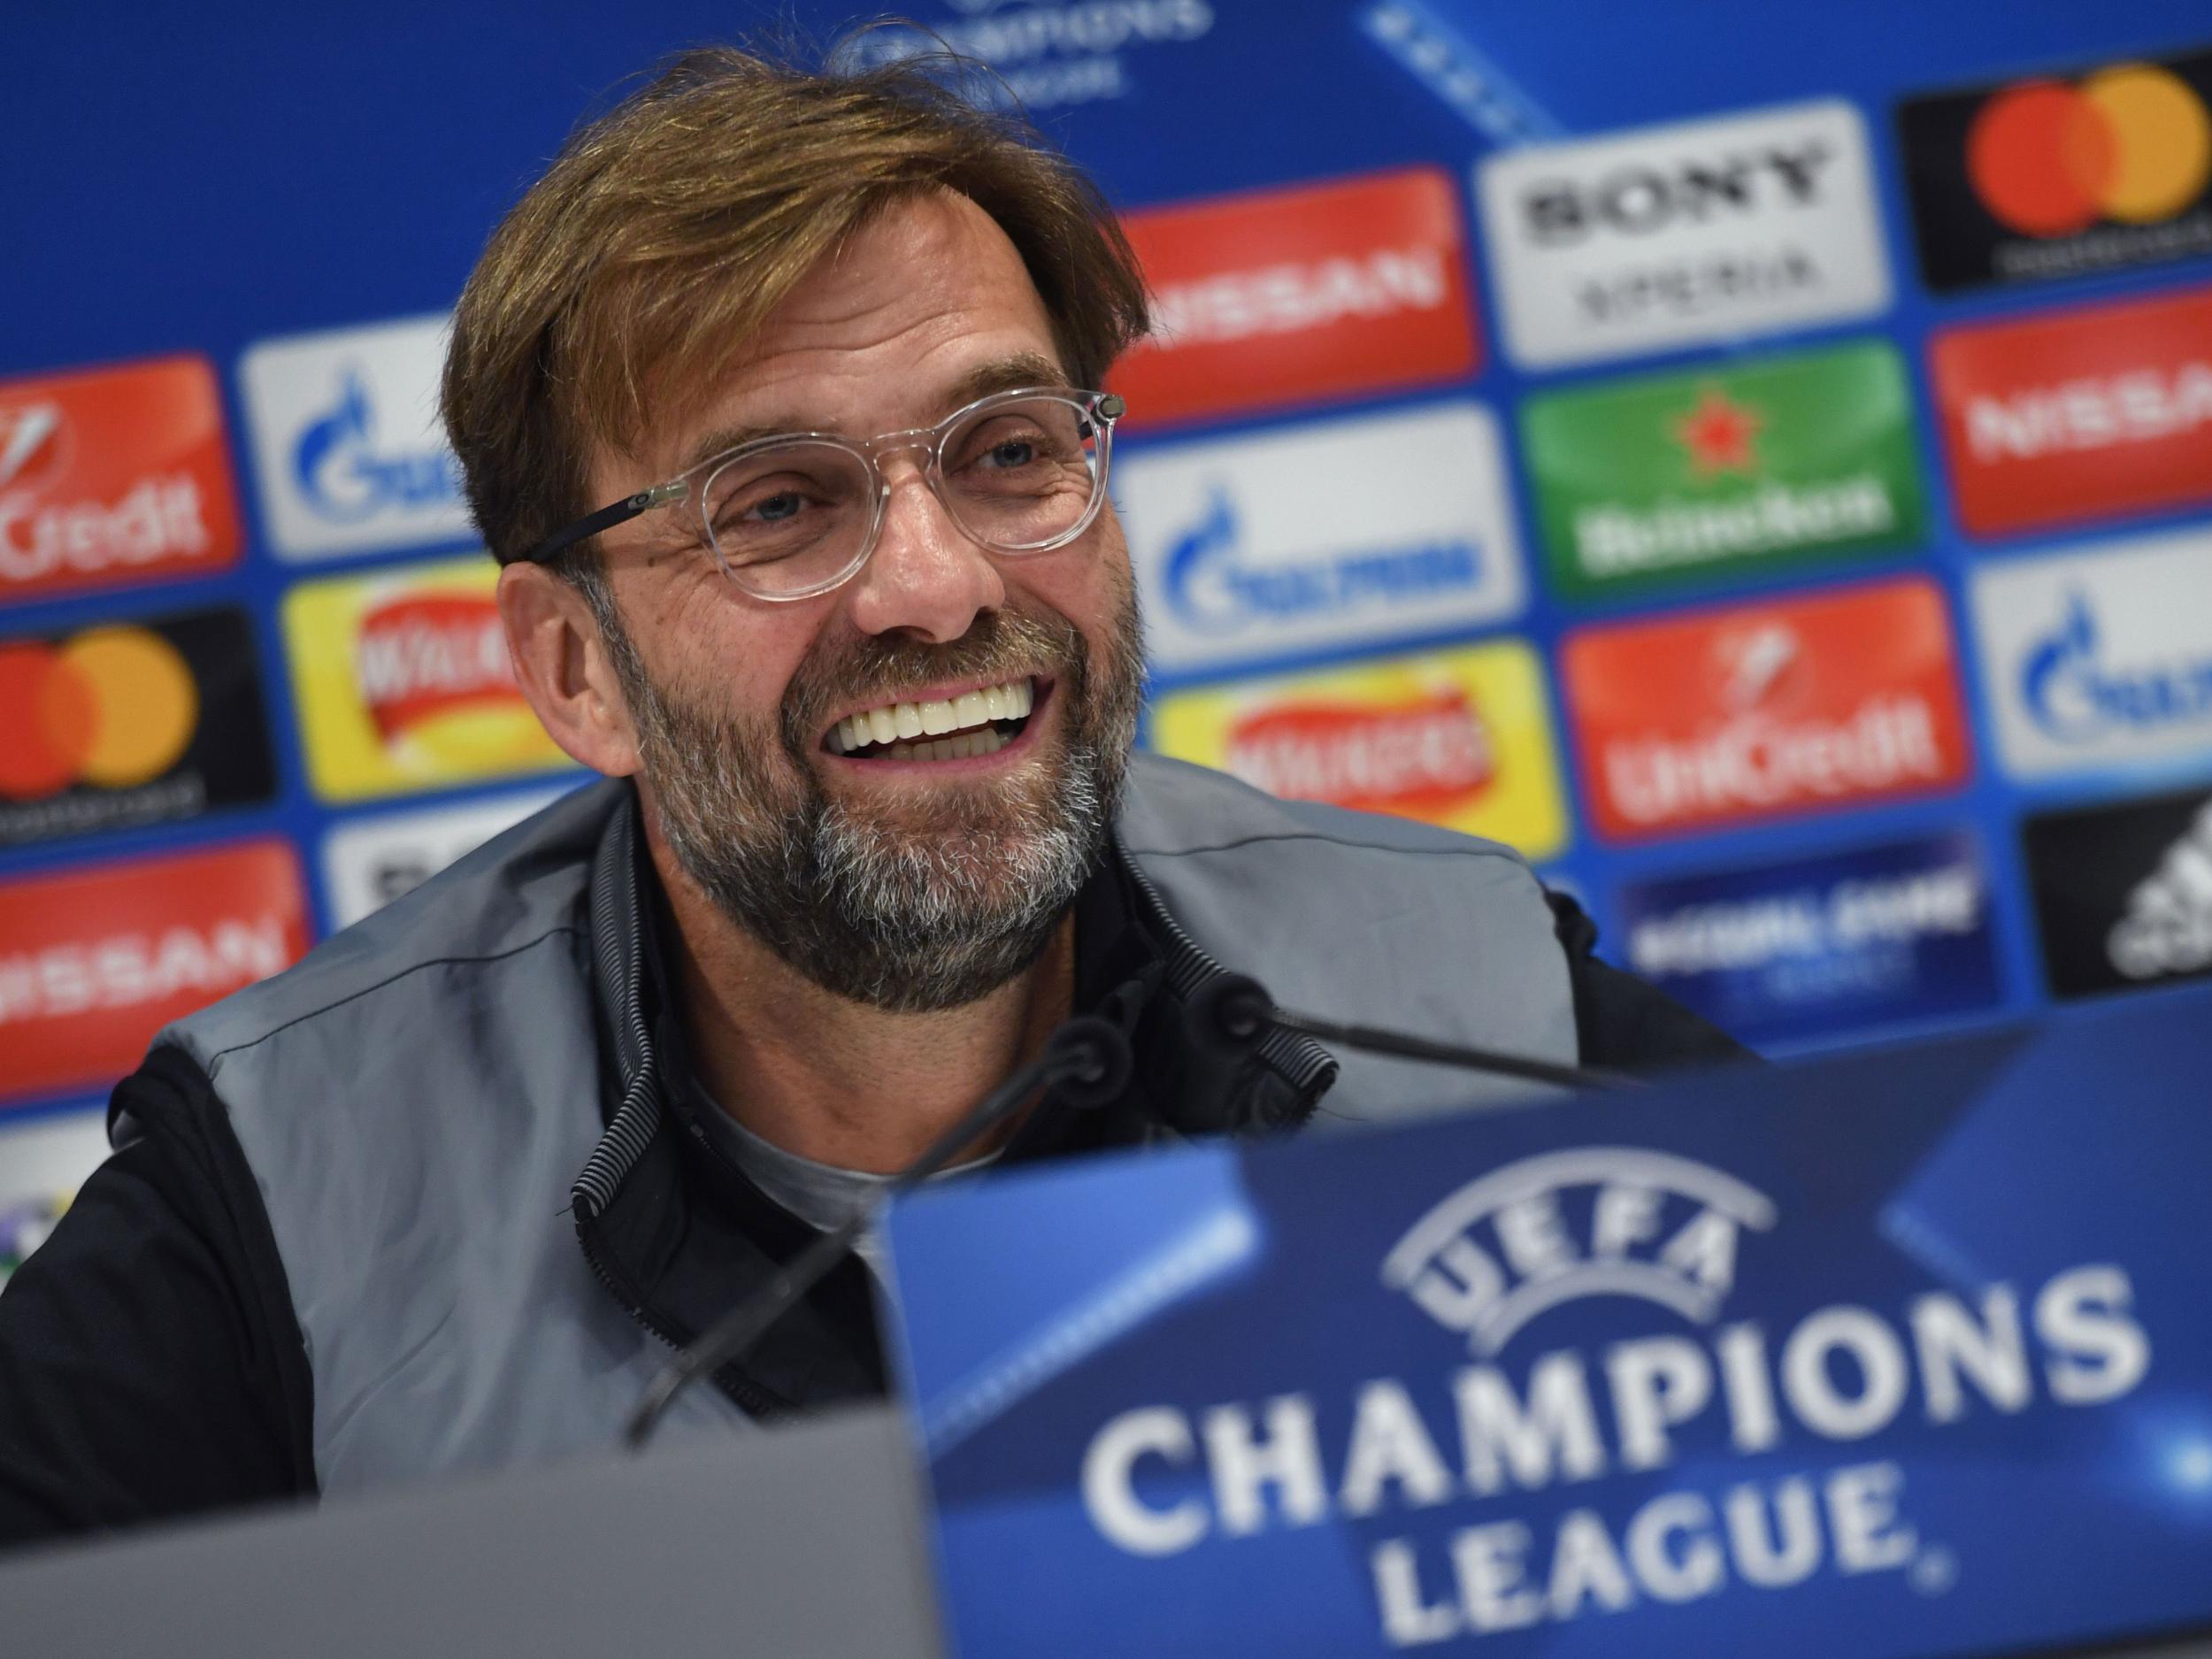 Jurgen Klopp intends to play a strong side in the second leg against Porto